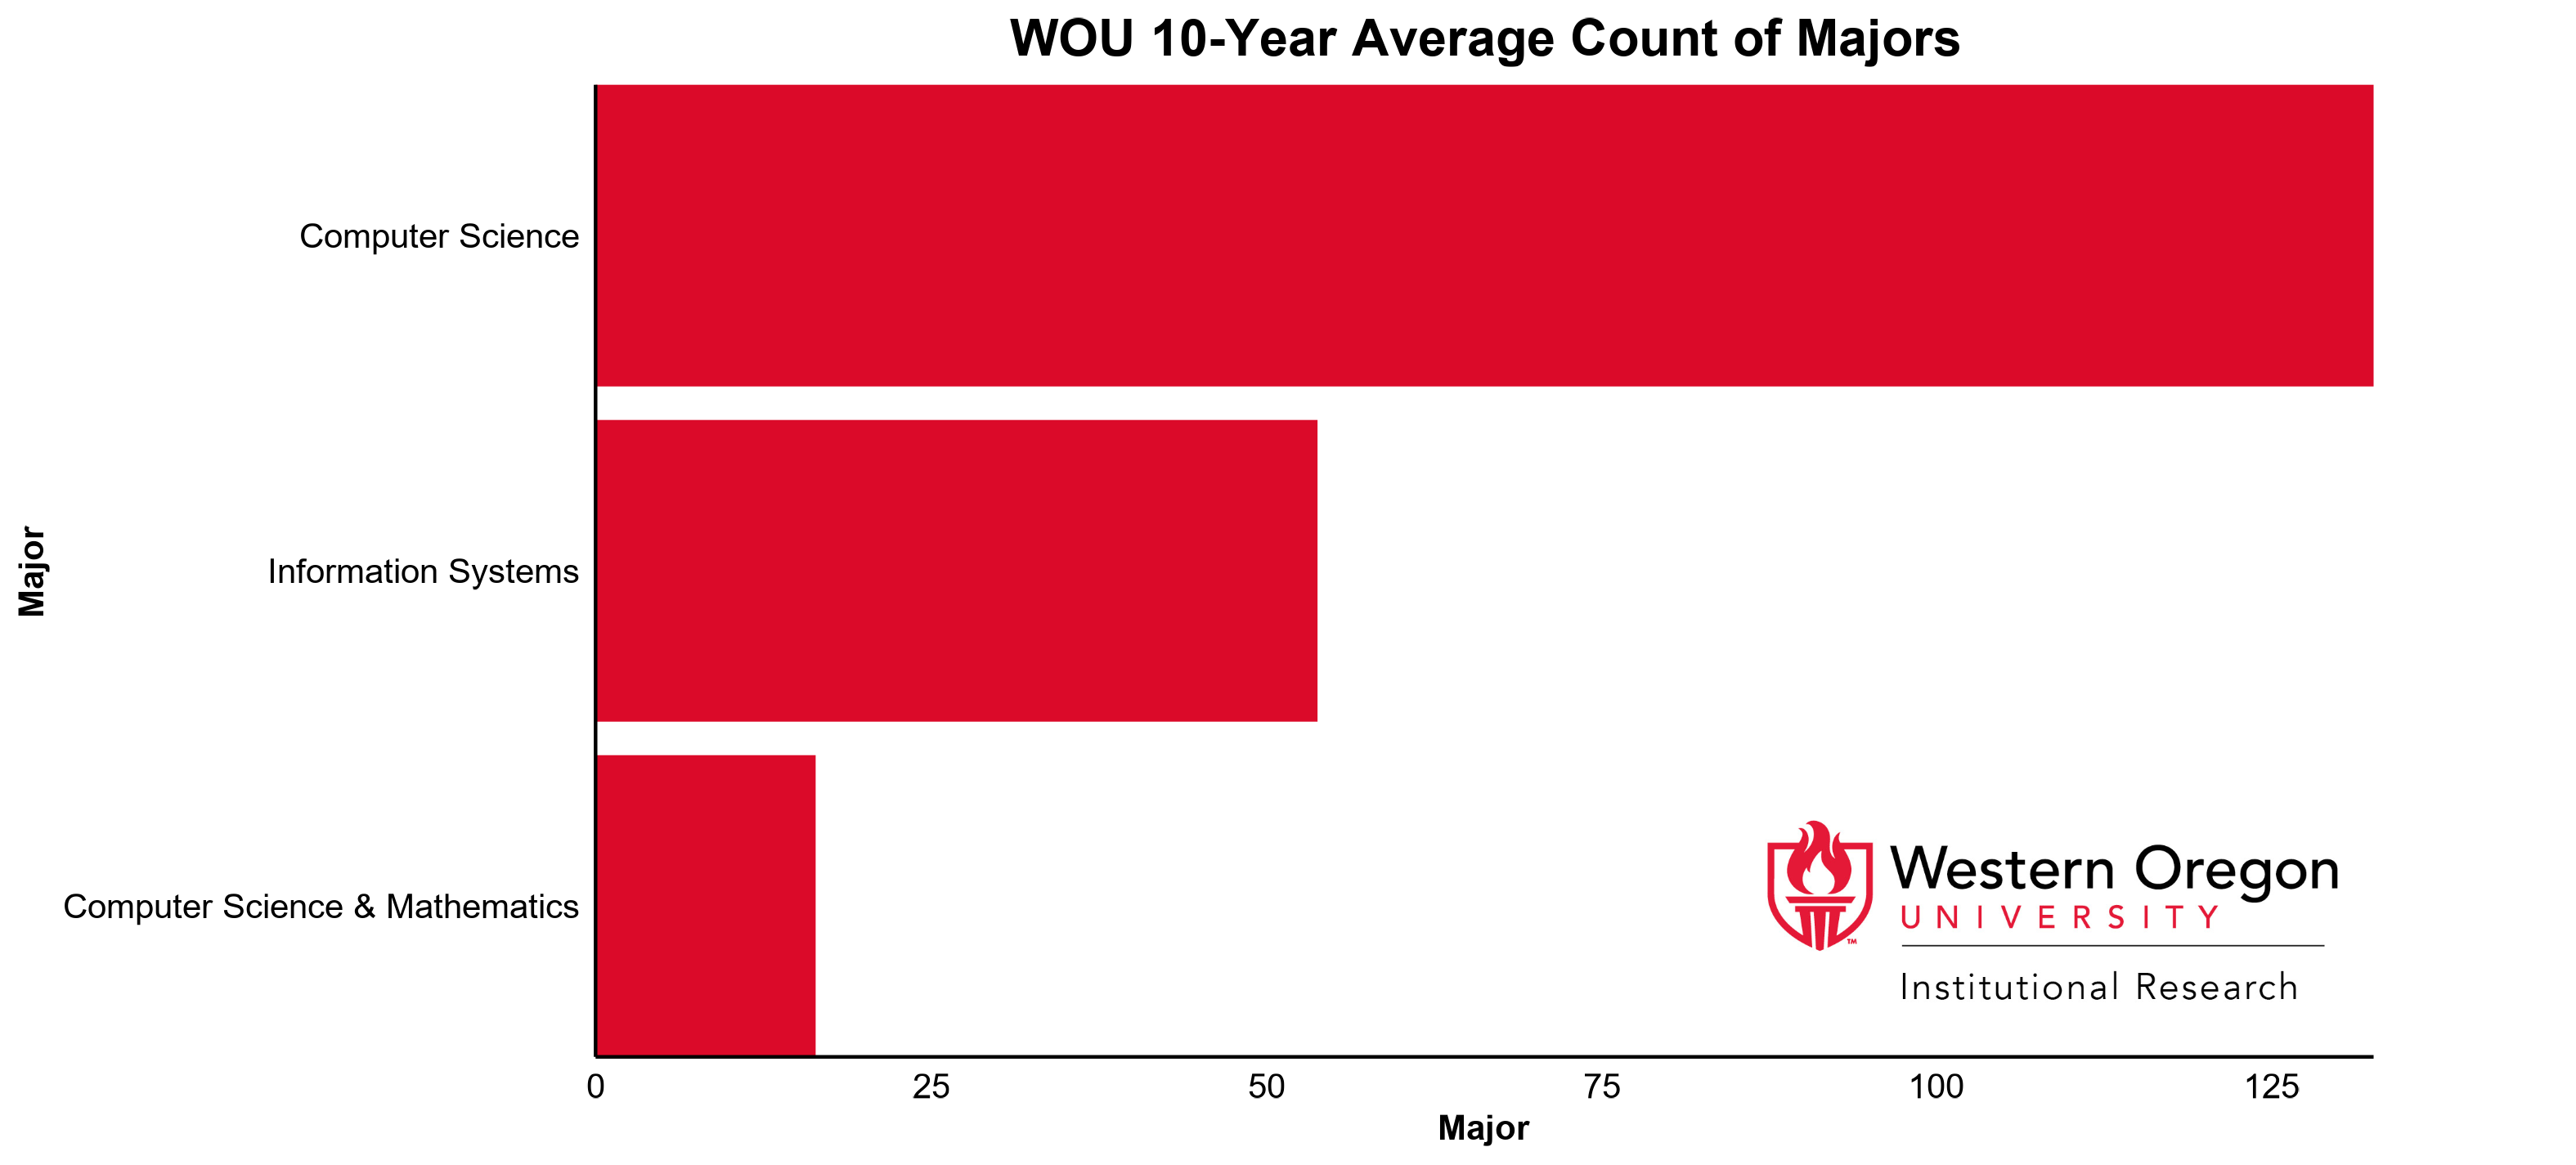 Bar graph of the 10-year average count of majors at WOU for the Computer Science division